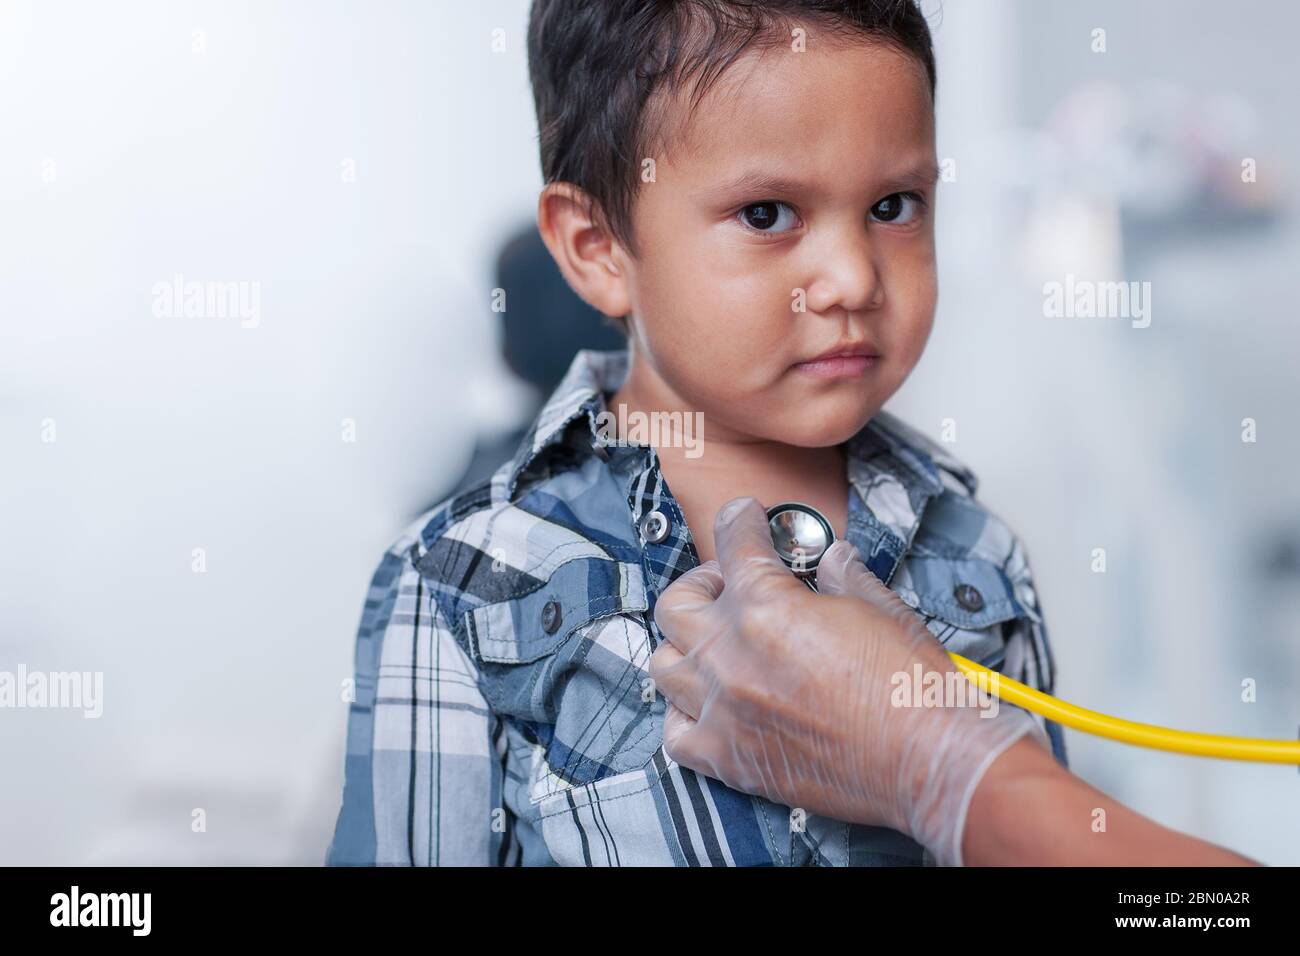 A preschool age boy getting a heart screening, using a stethoscope on chest with a buttoned down shirt. Stock Photo